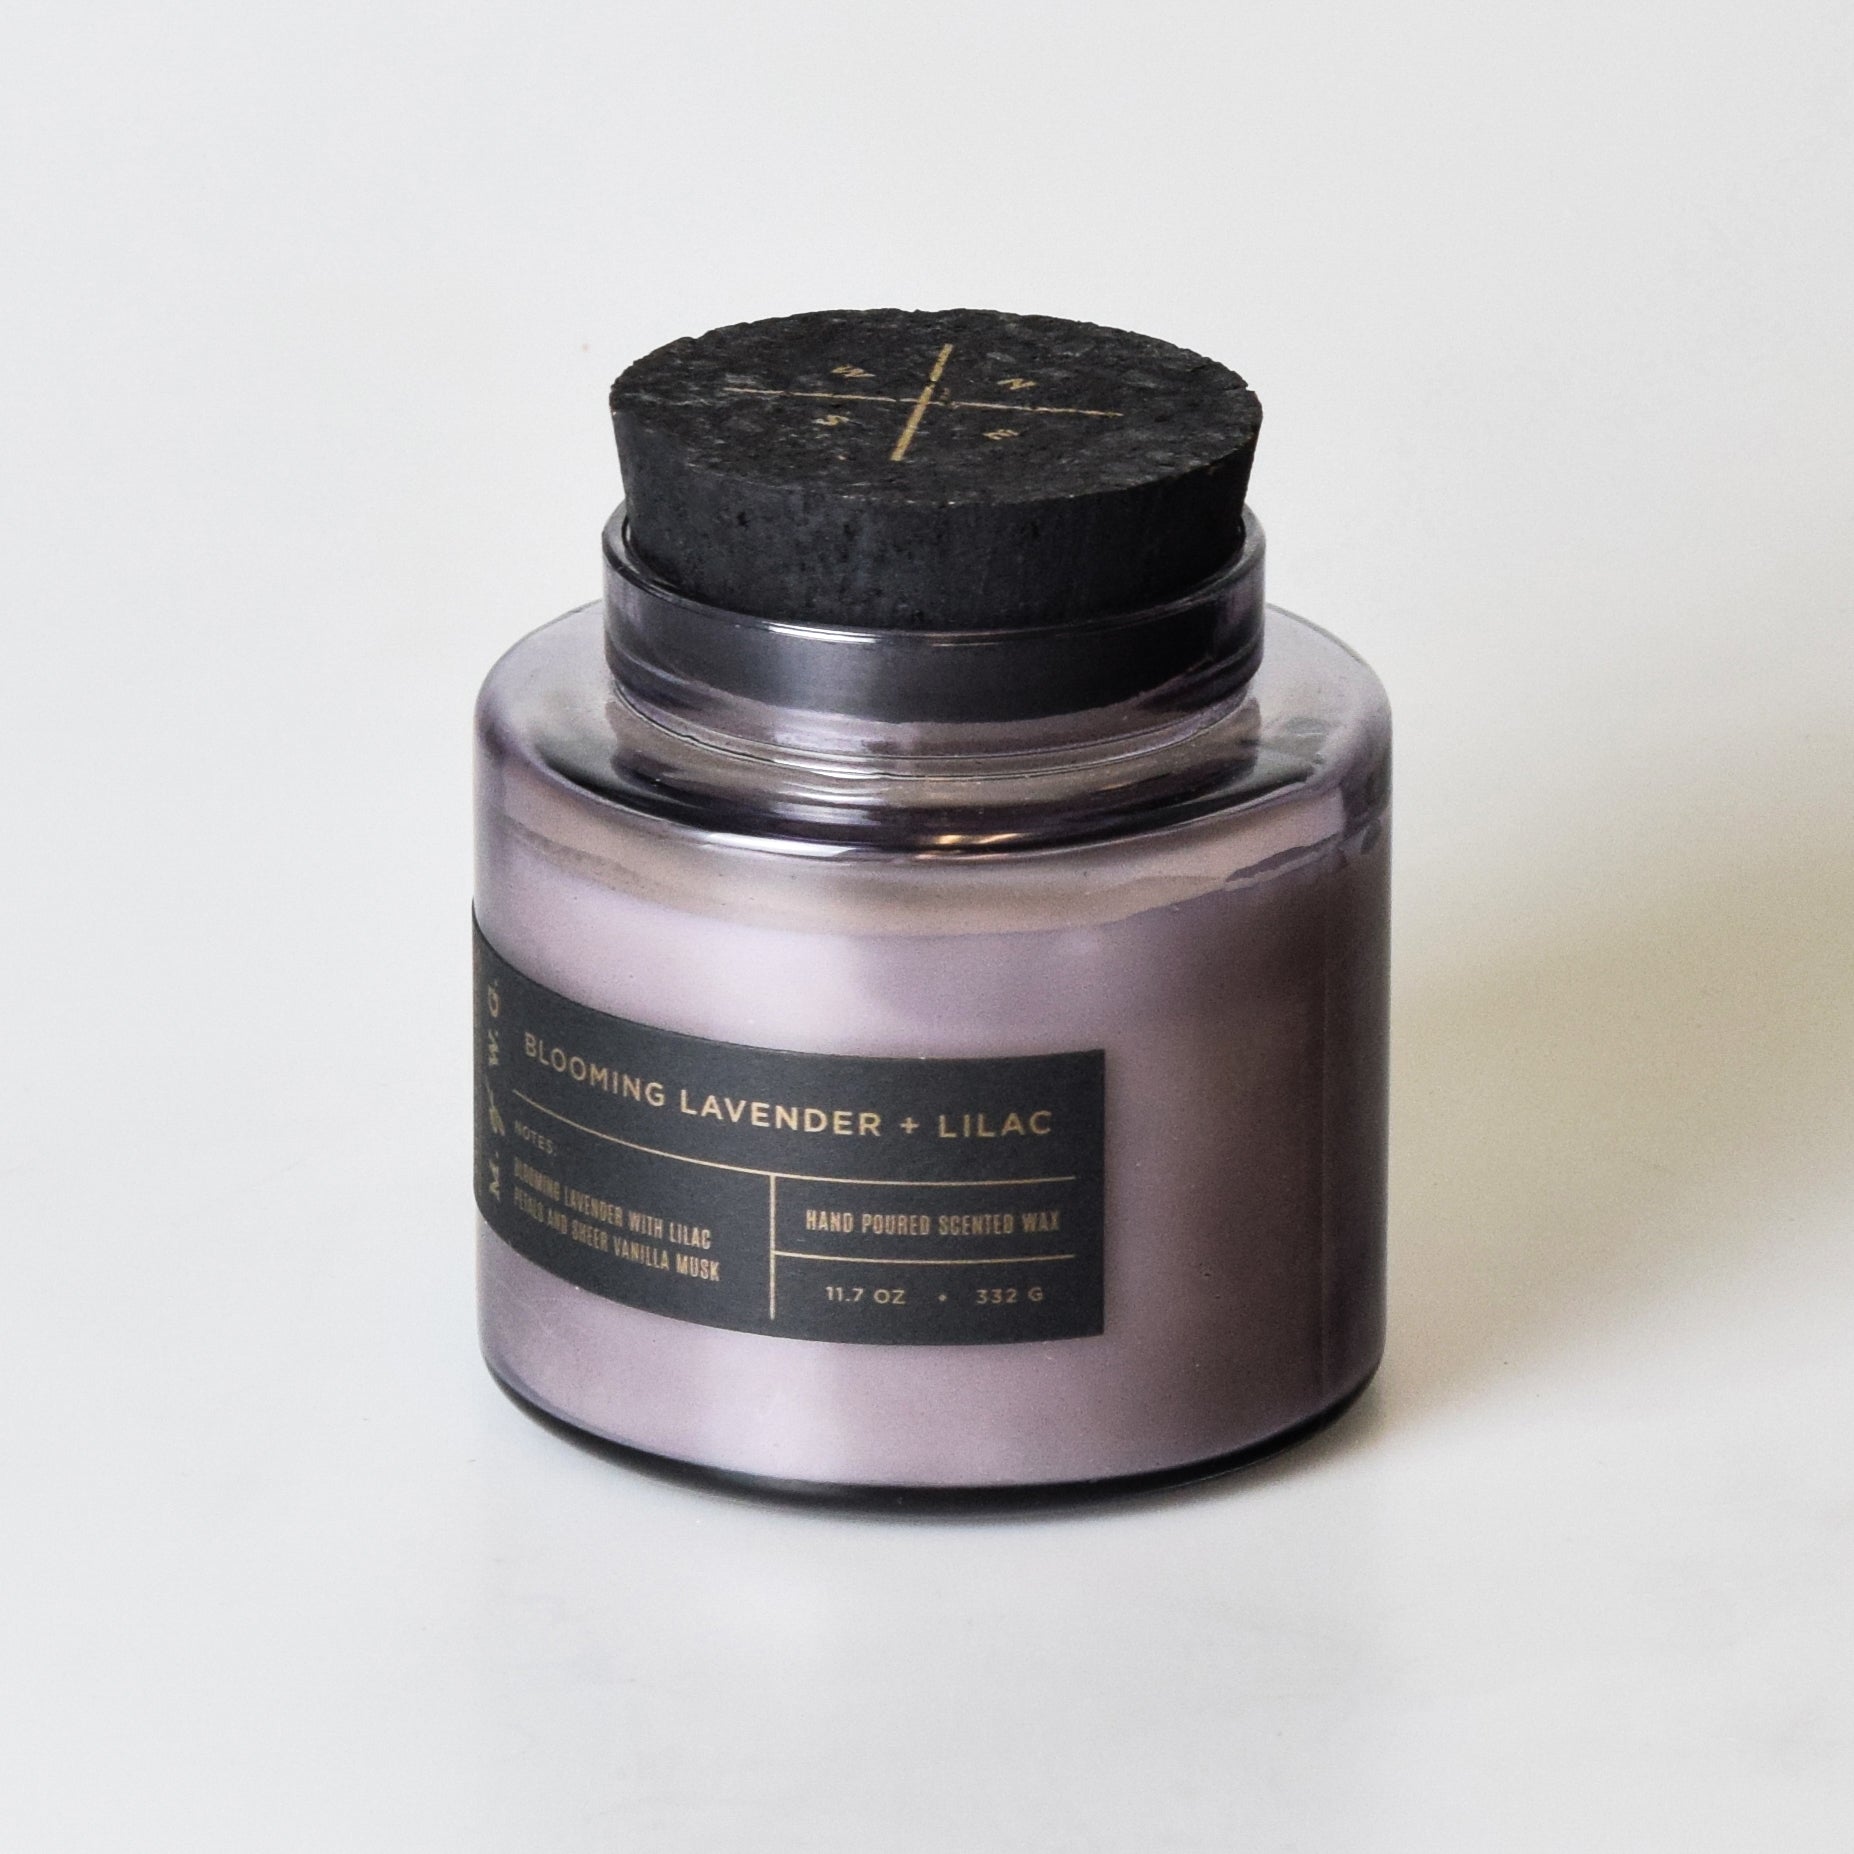 Blooming Lavender & Lilac – Makers of Wax Goods